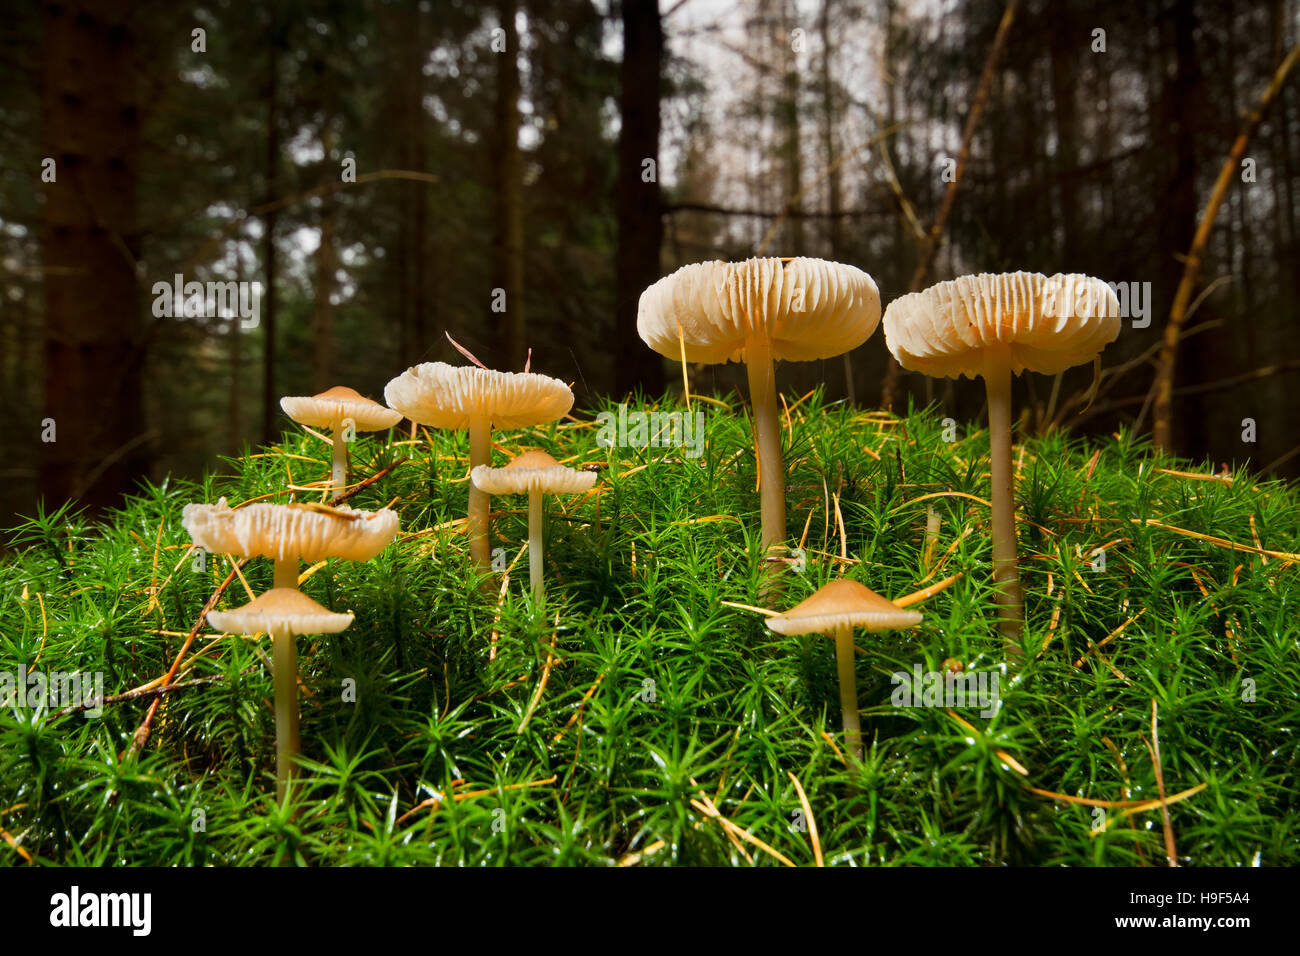 Small mushrooms, probably of the Inocybe genus, in Hair moss Stock Photo